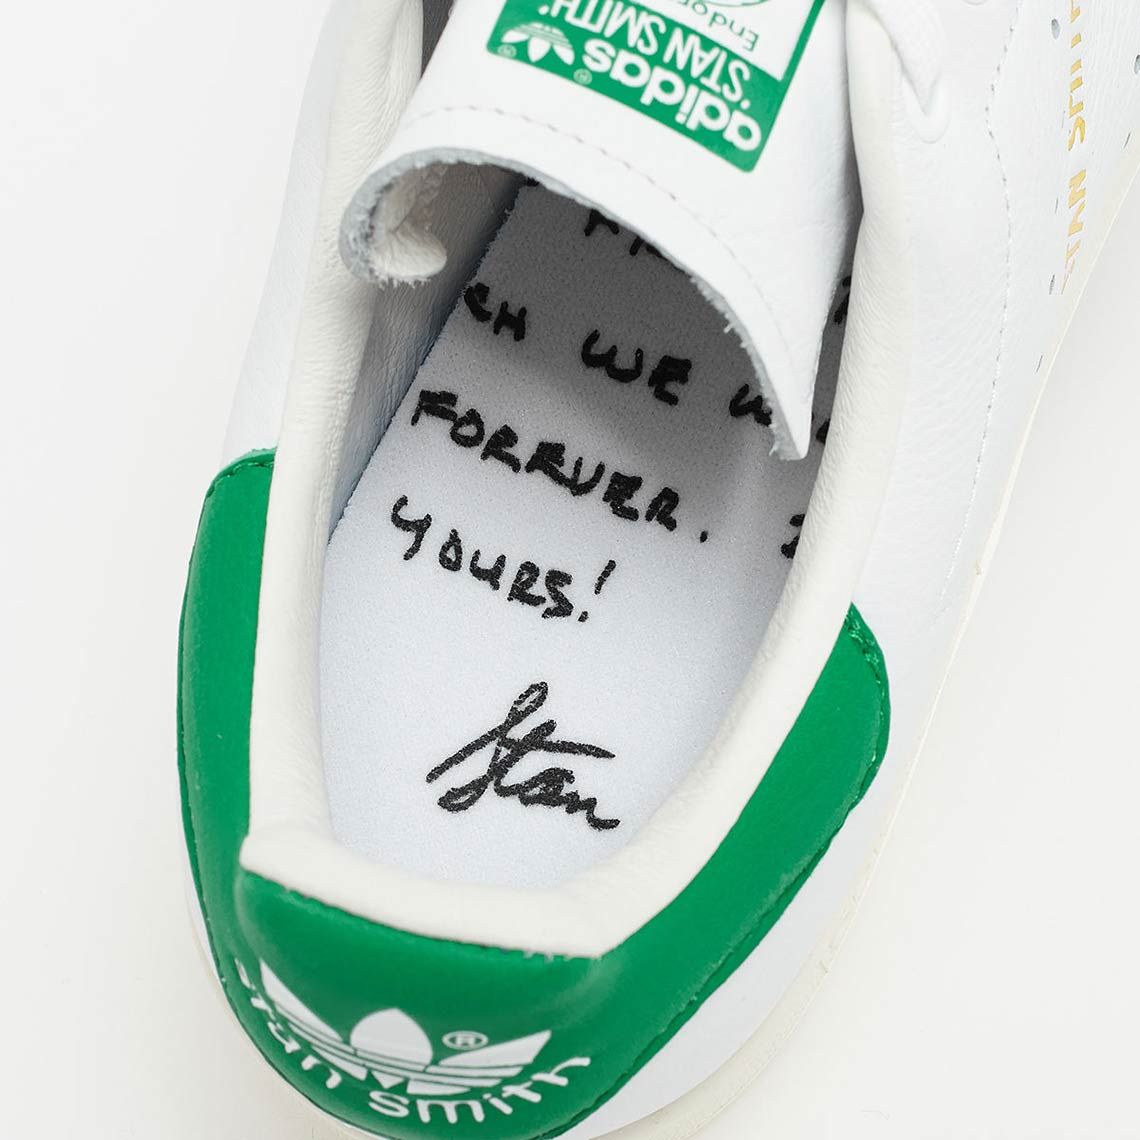 stan smith with signature